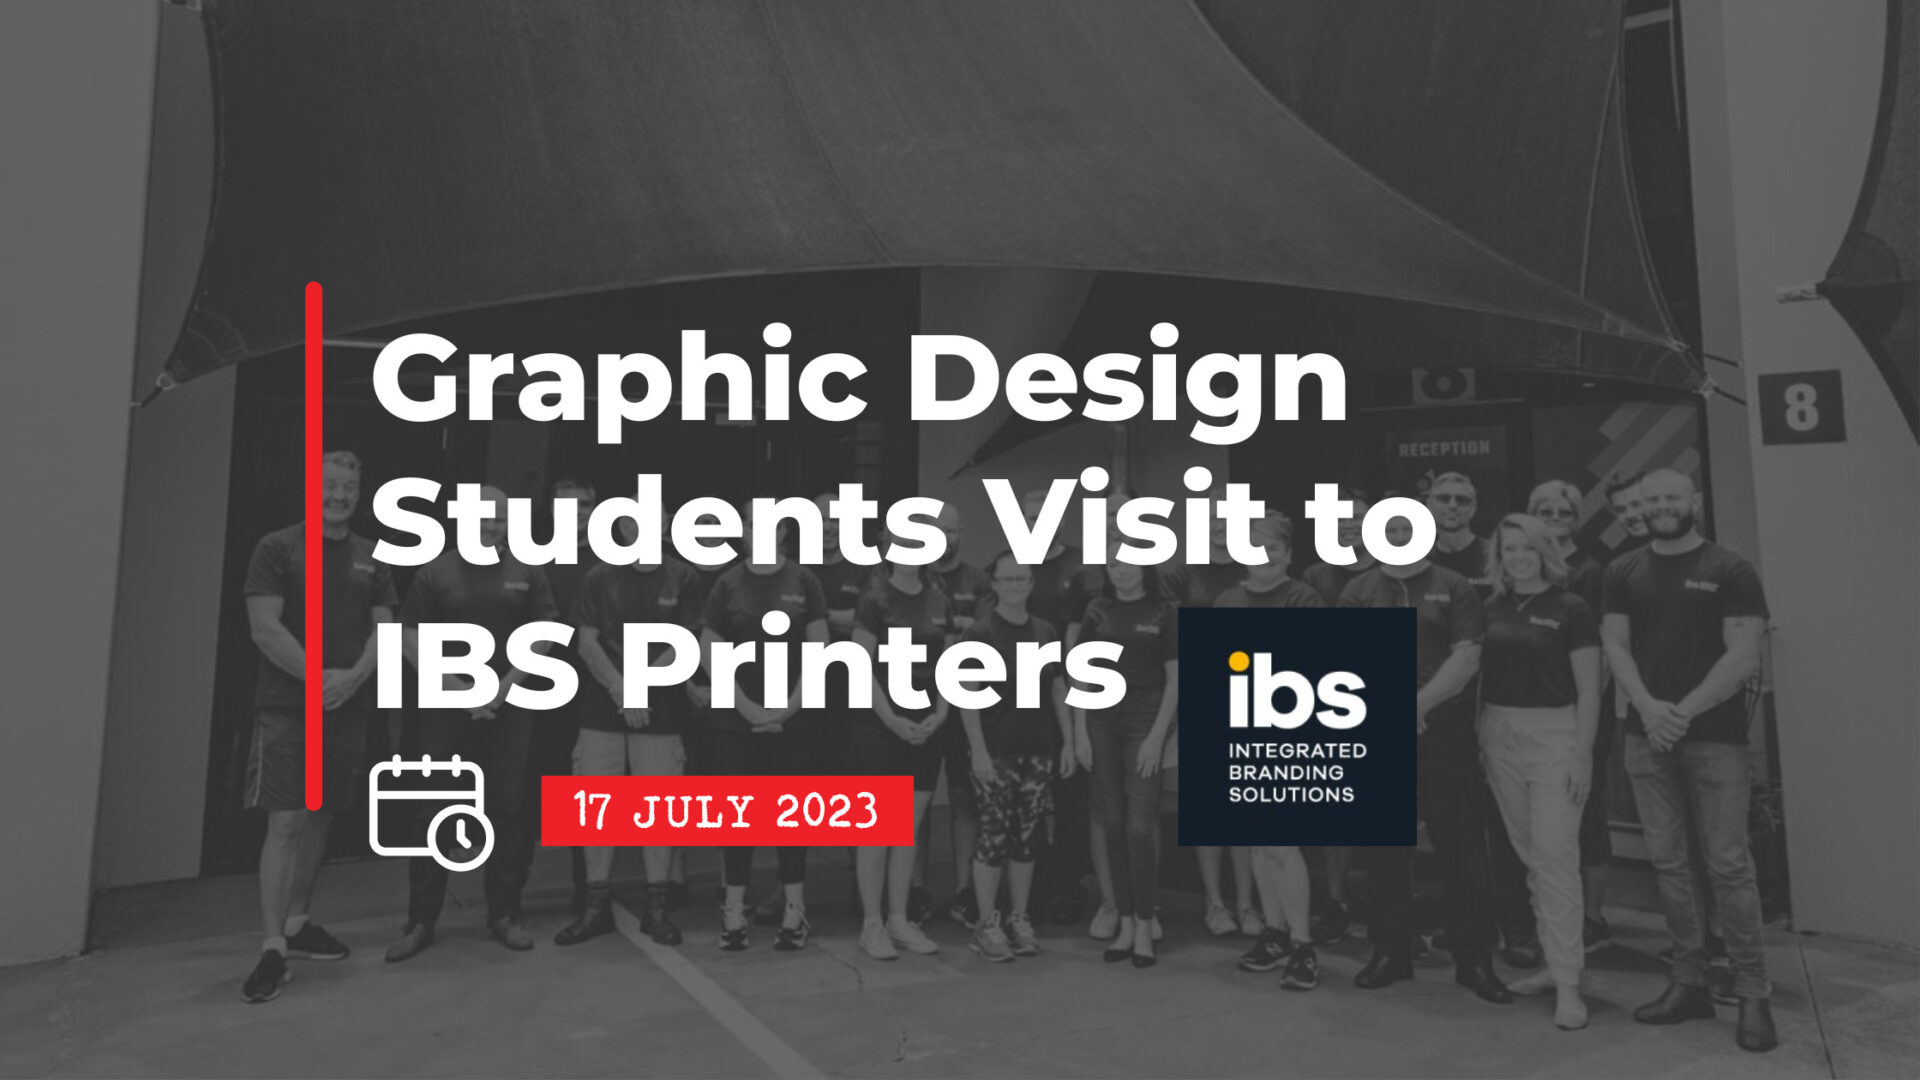 17 July 2023: Industry Experience – Graphic Design Students Visit to IBS Printers this July